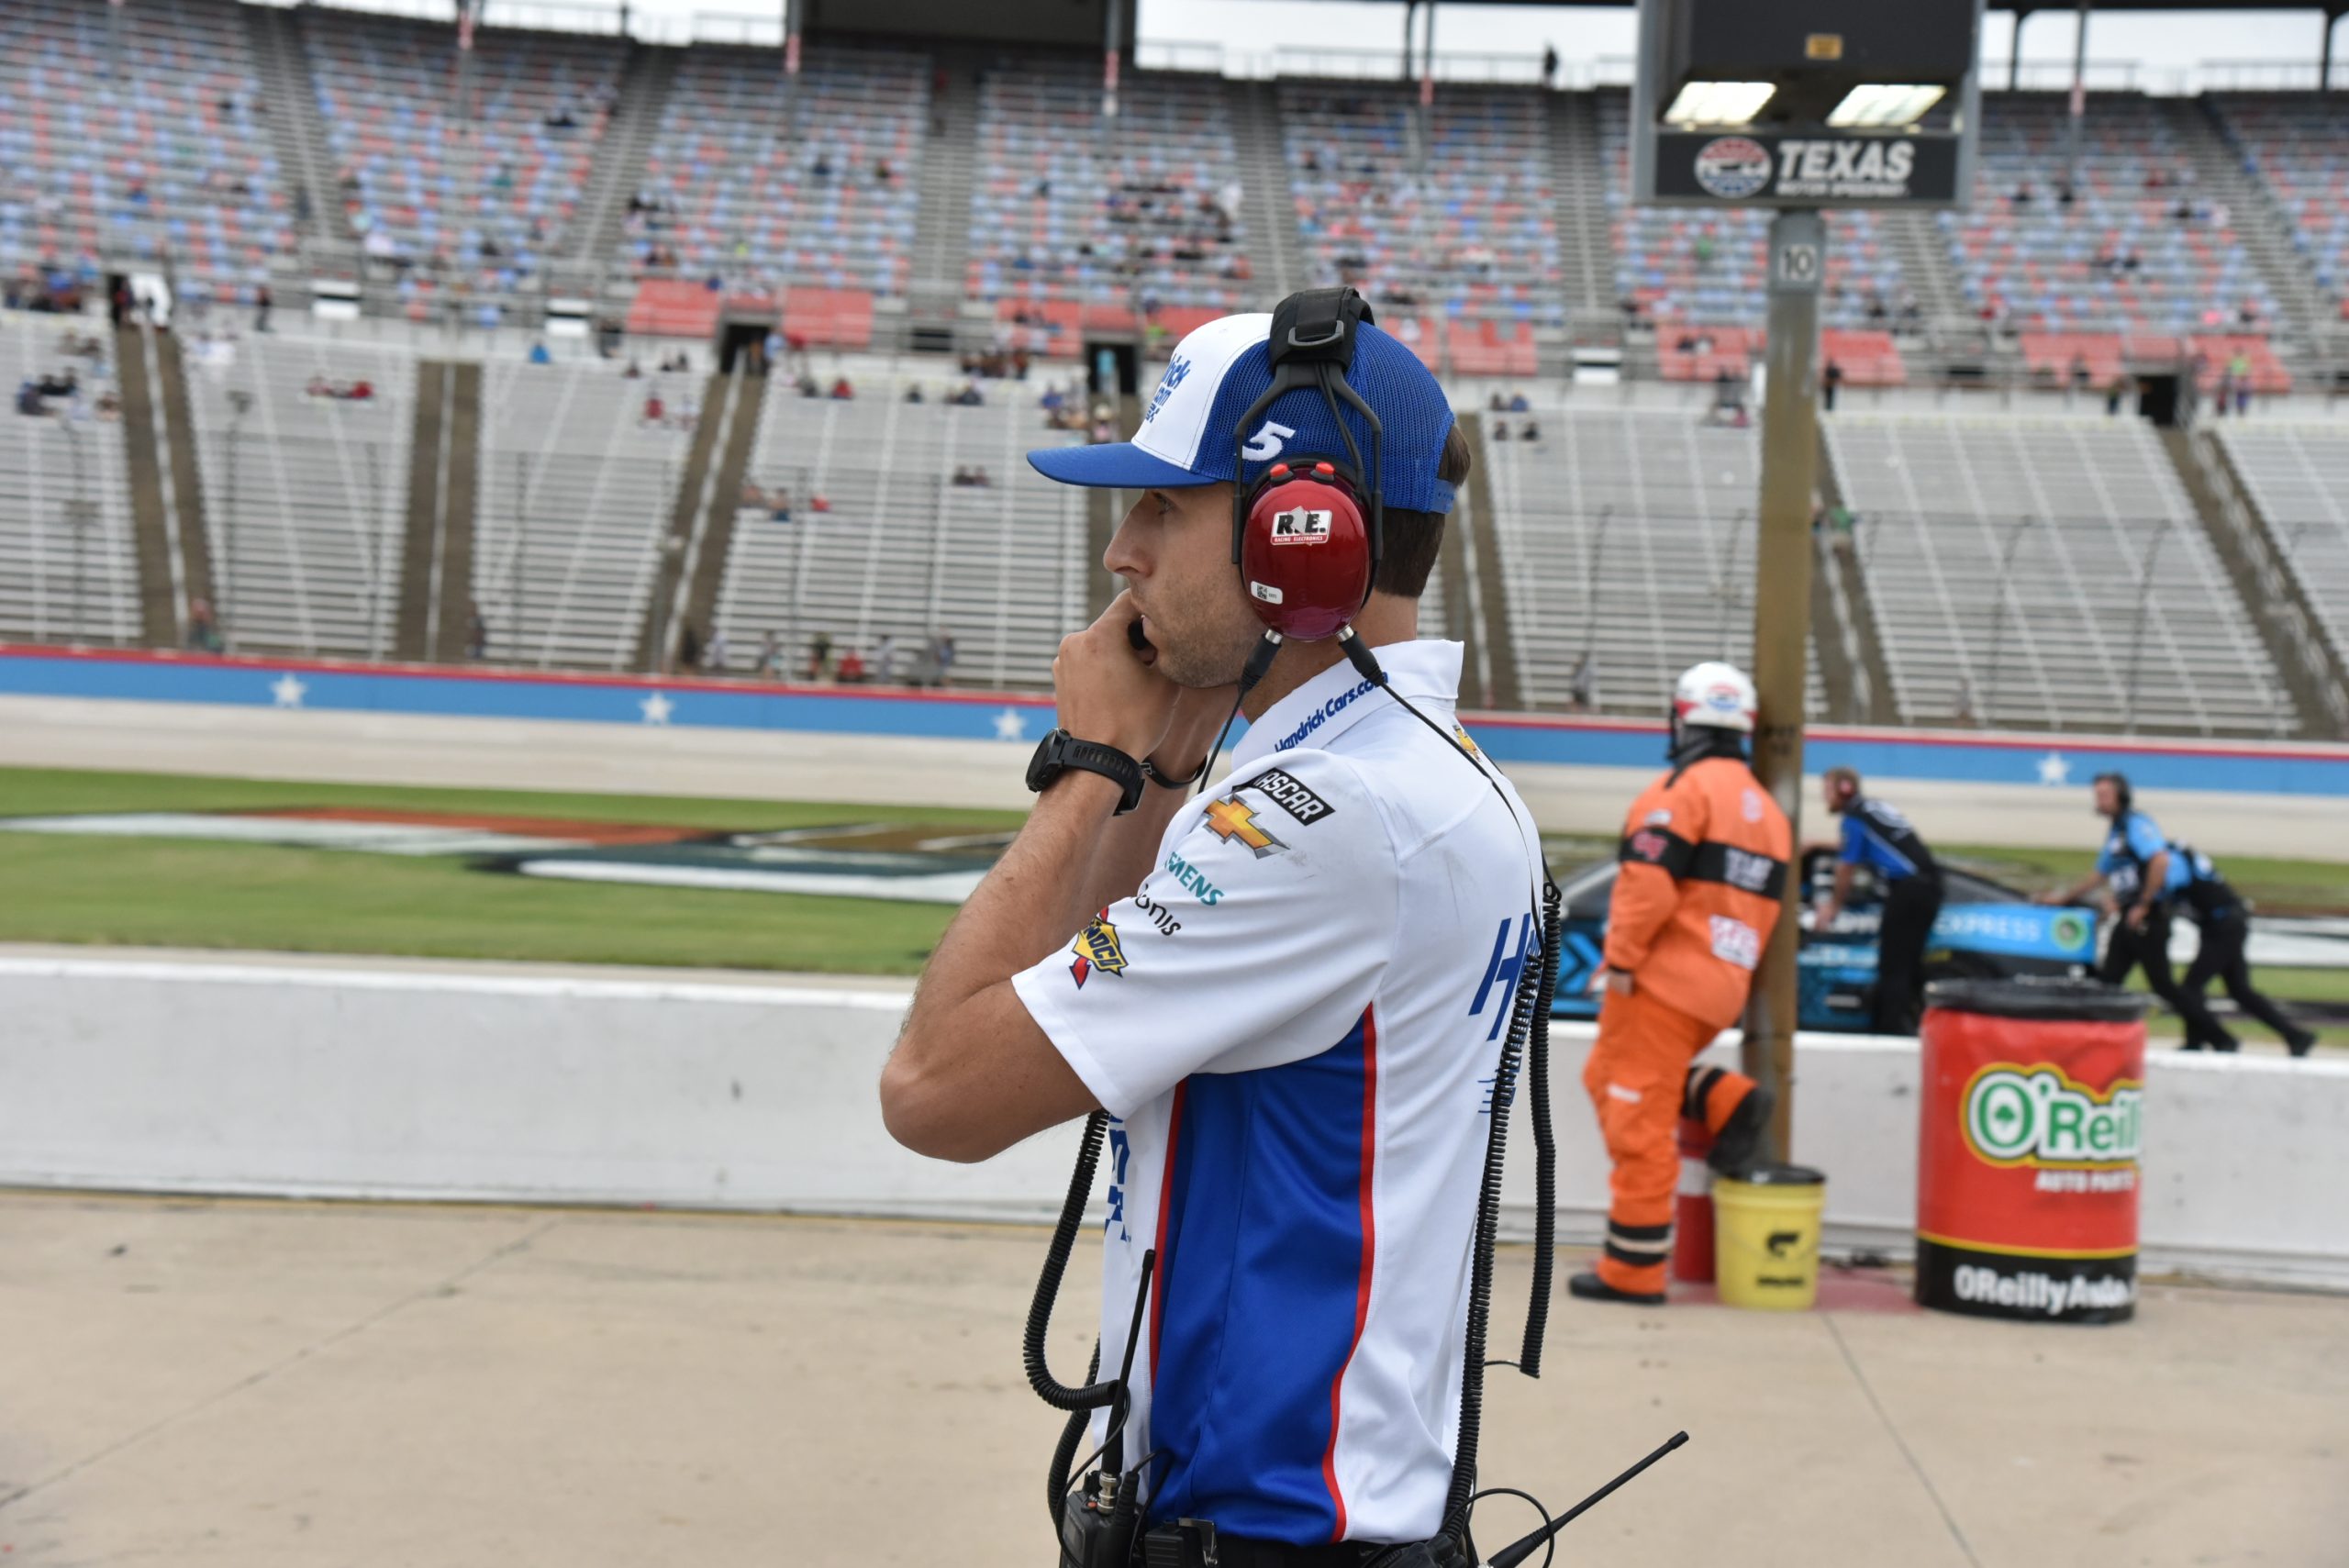 Daniels considers the possibilities for another NASCAR All-Star Race win at Texas. (Photo: Luis Torres | The Podium Finish)